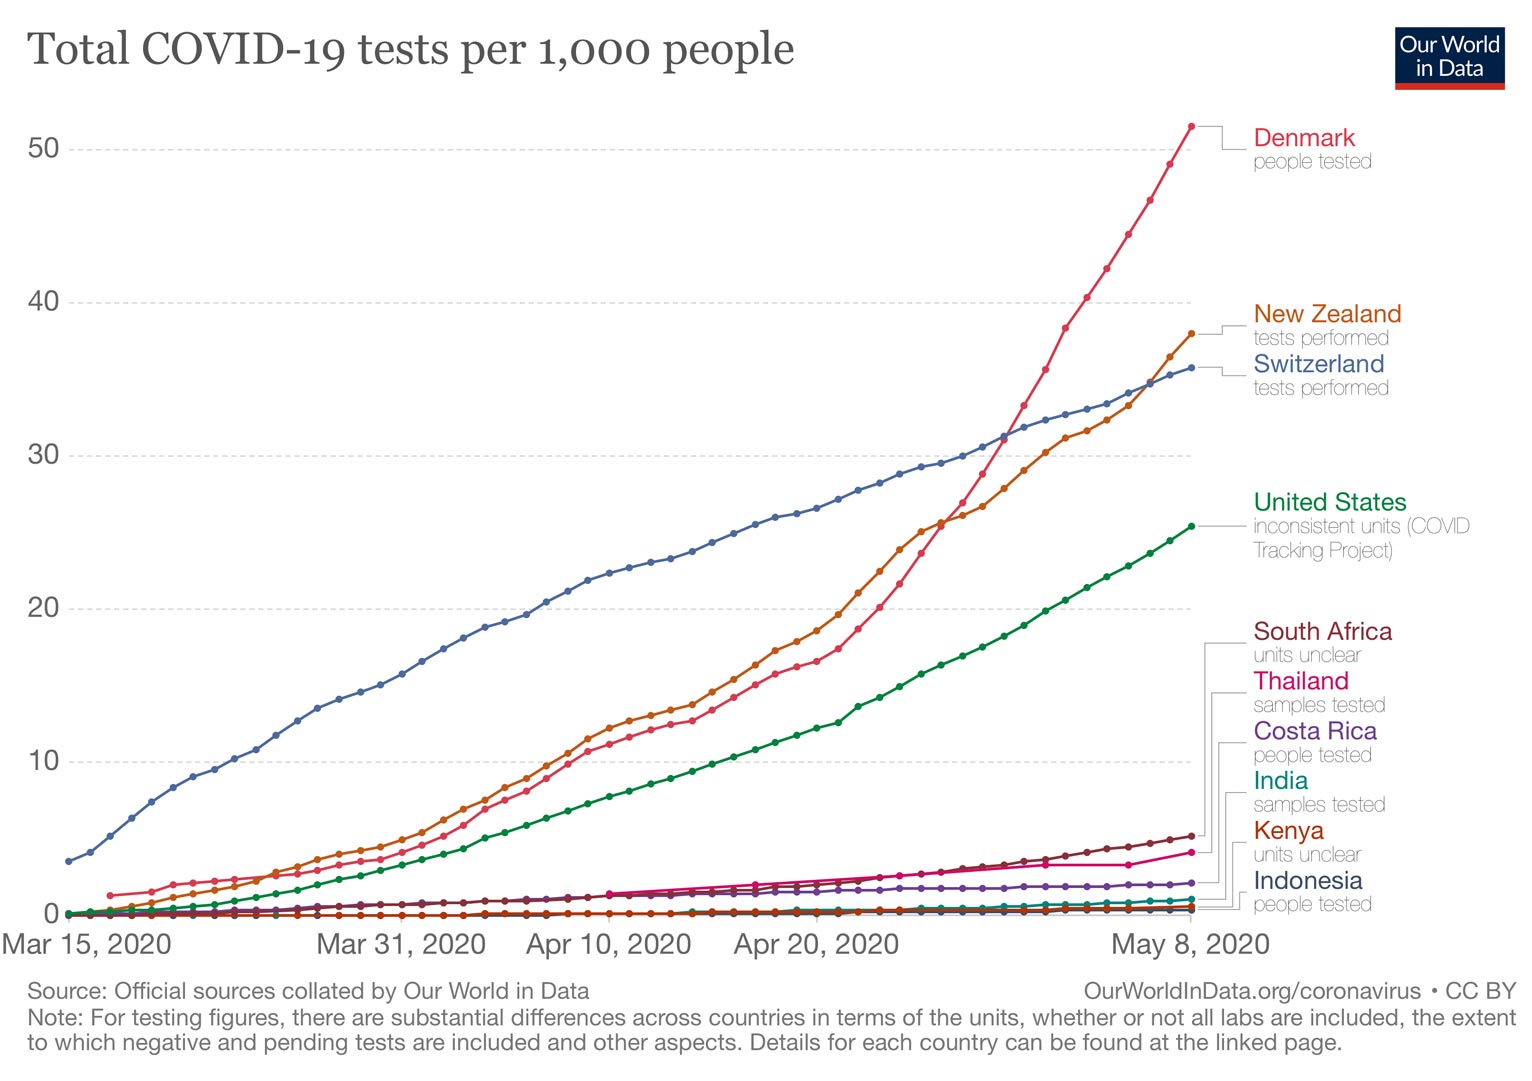 Total COVID-19 tests per 1,000 people; source: Our World in Data